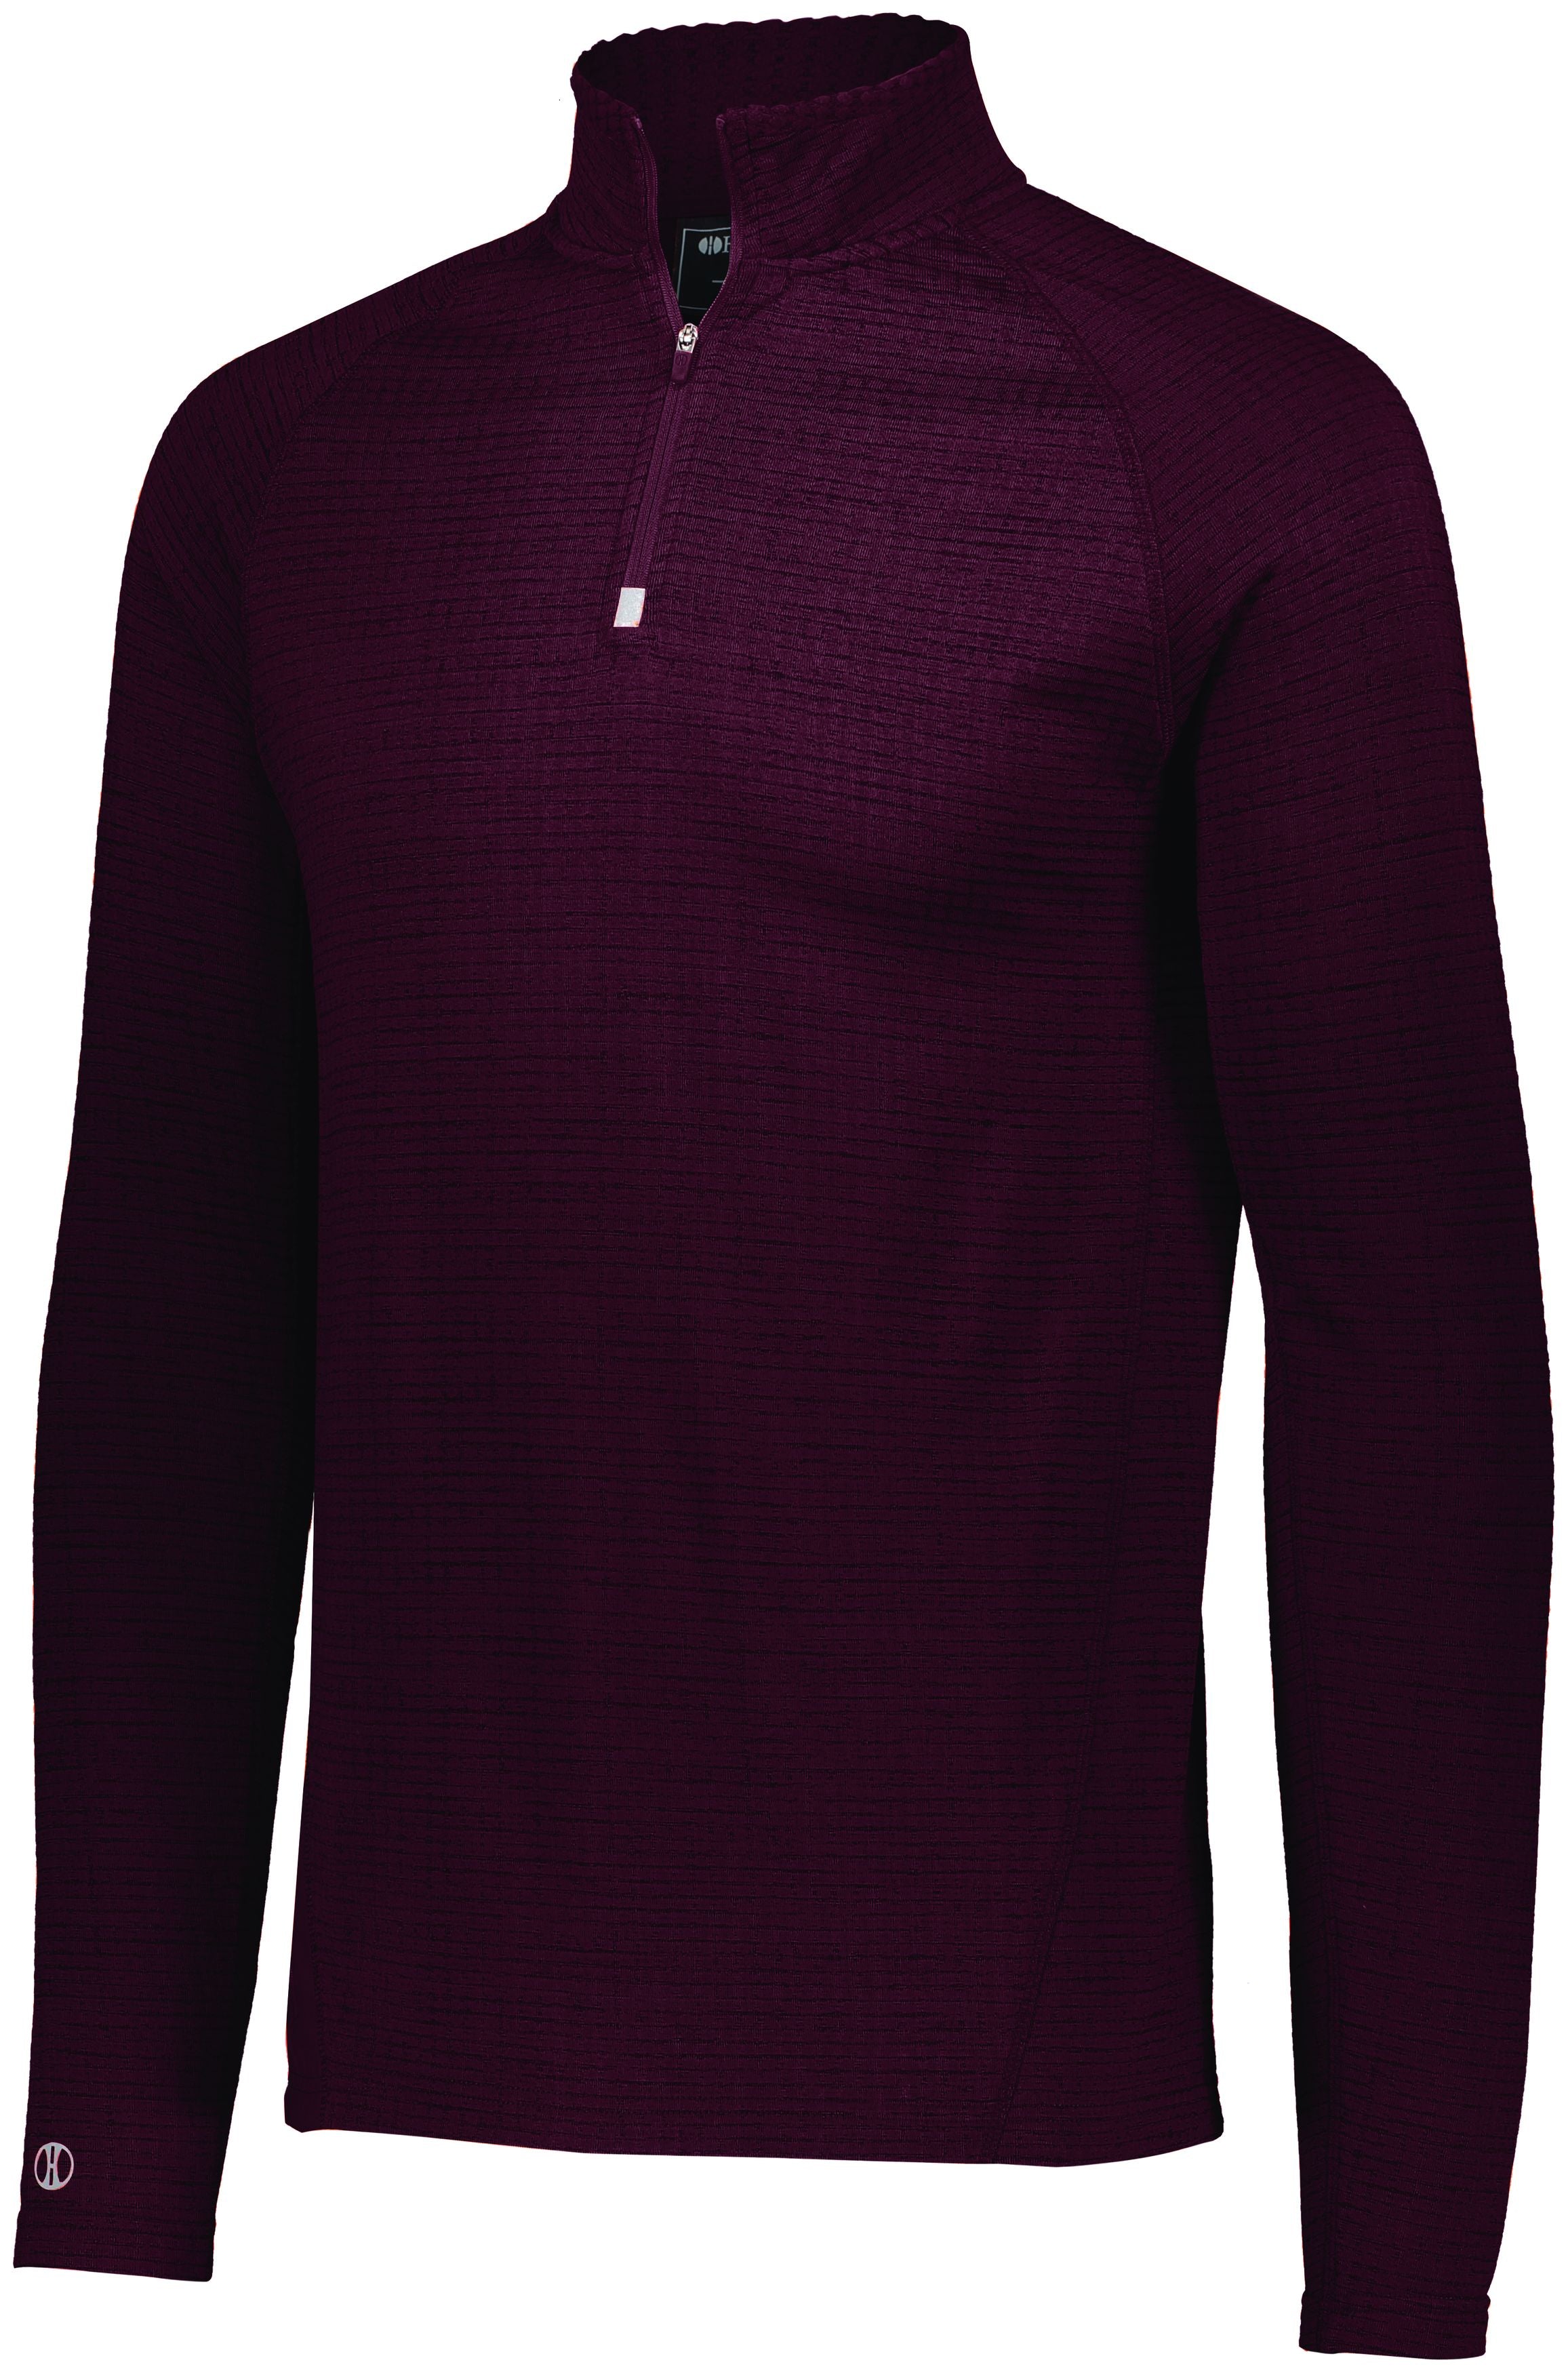 Holloway 3D Regulate Lightweight Pullover in Maroon Heather  -Part of the Adult, Adult-Pullover, Holloway, Outerwear, 3D-Collection product lines at KanaleyCreations.com